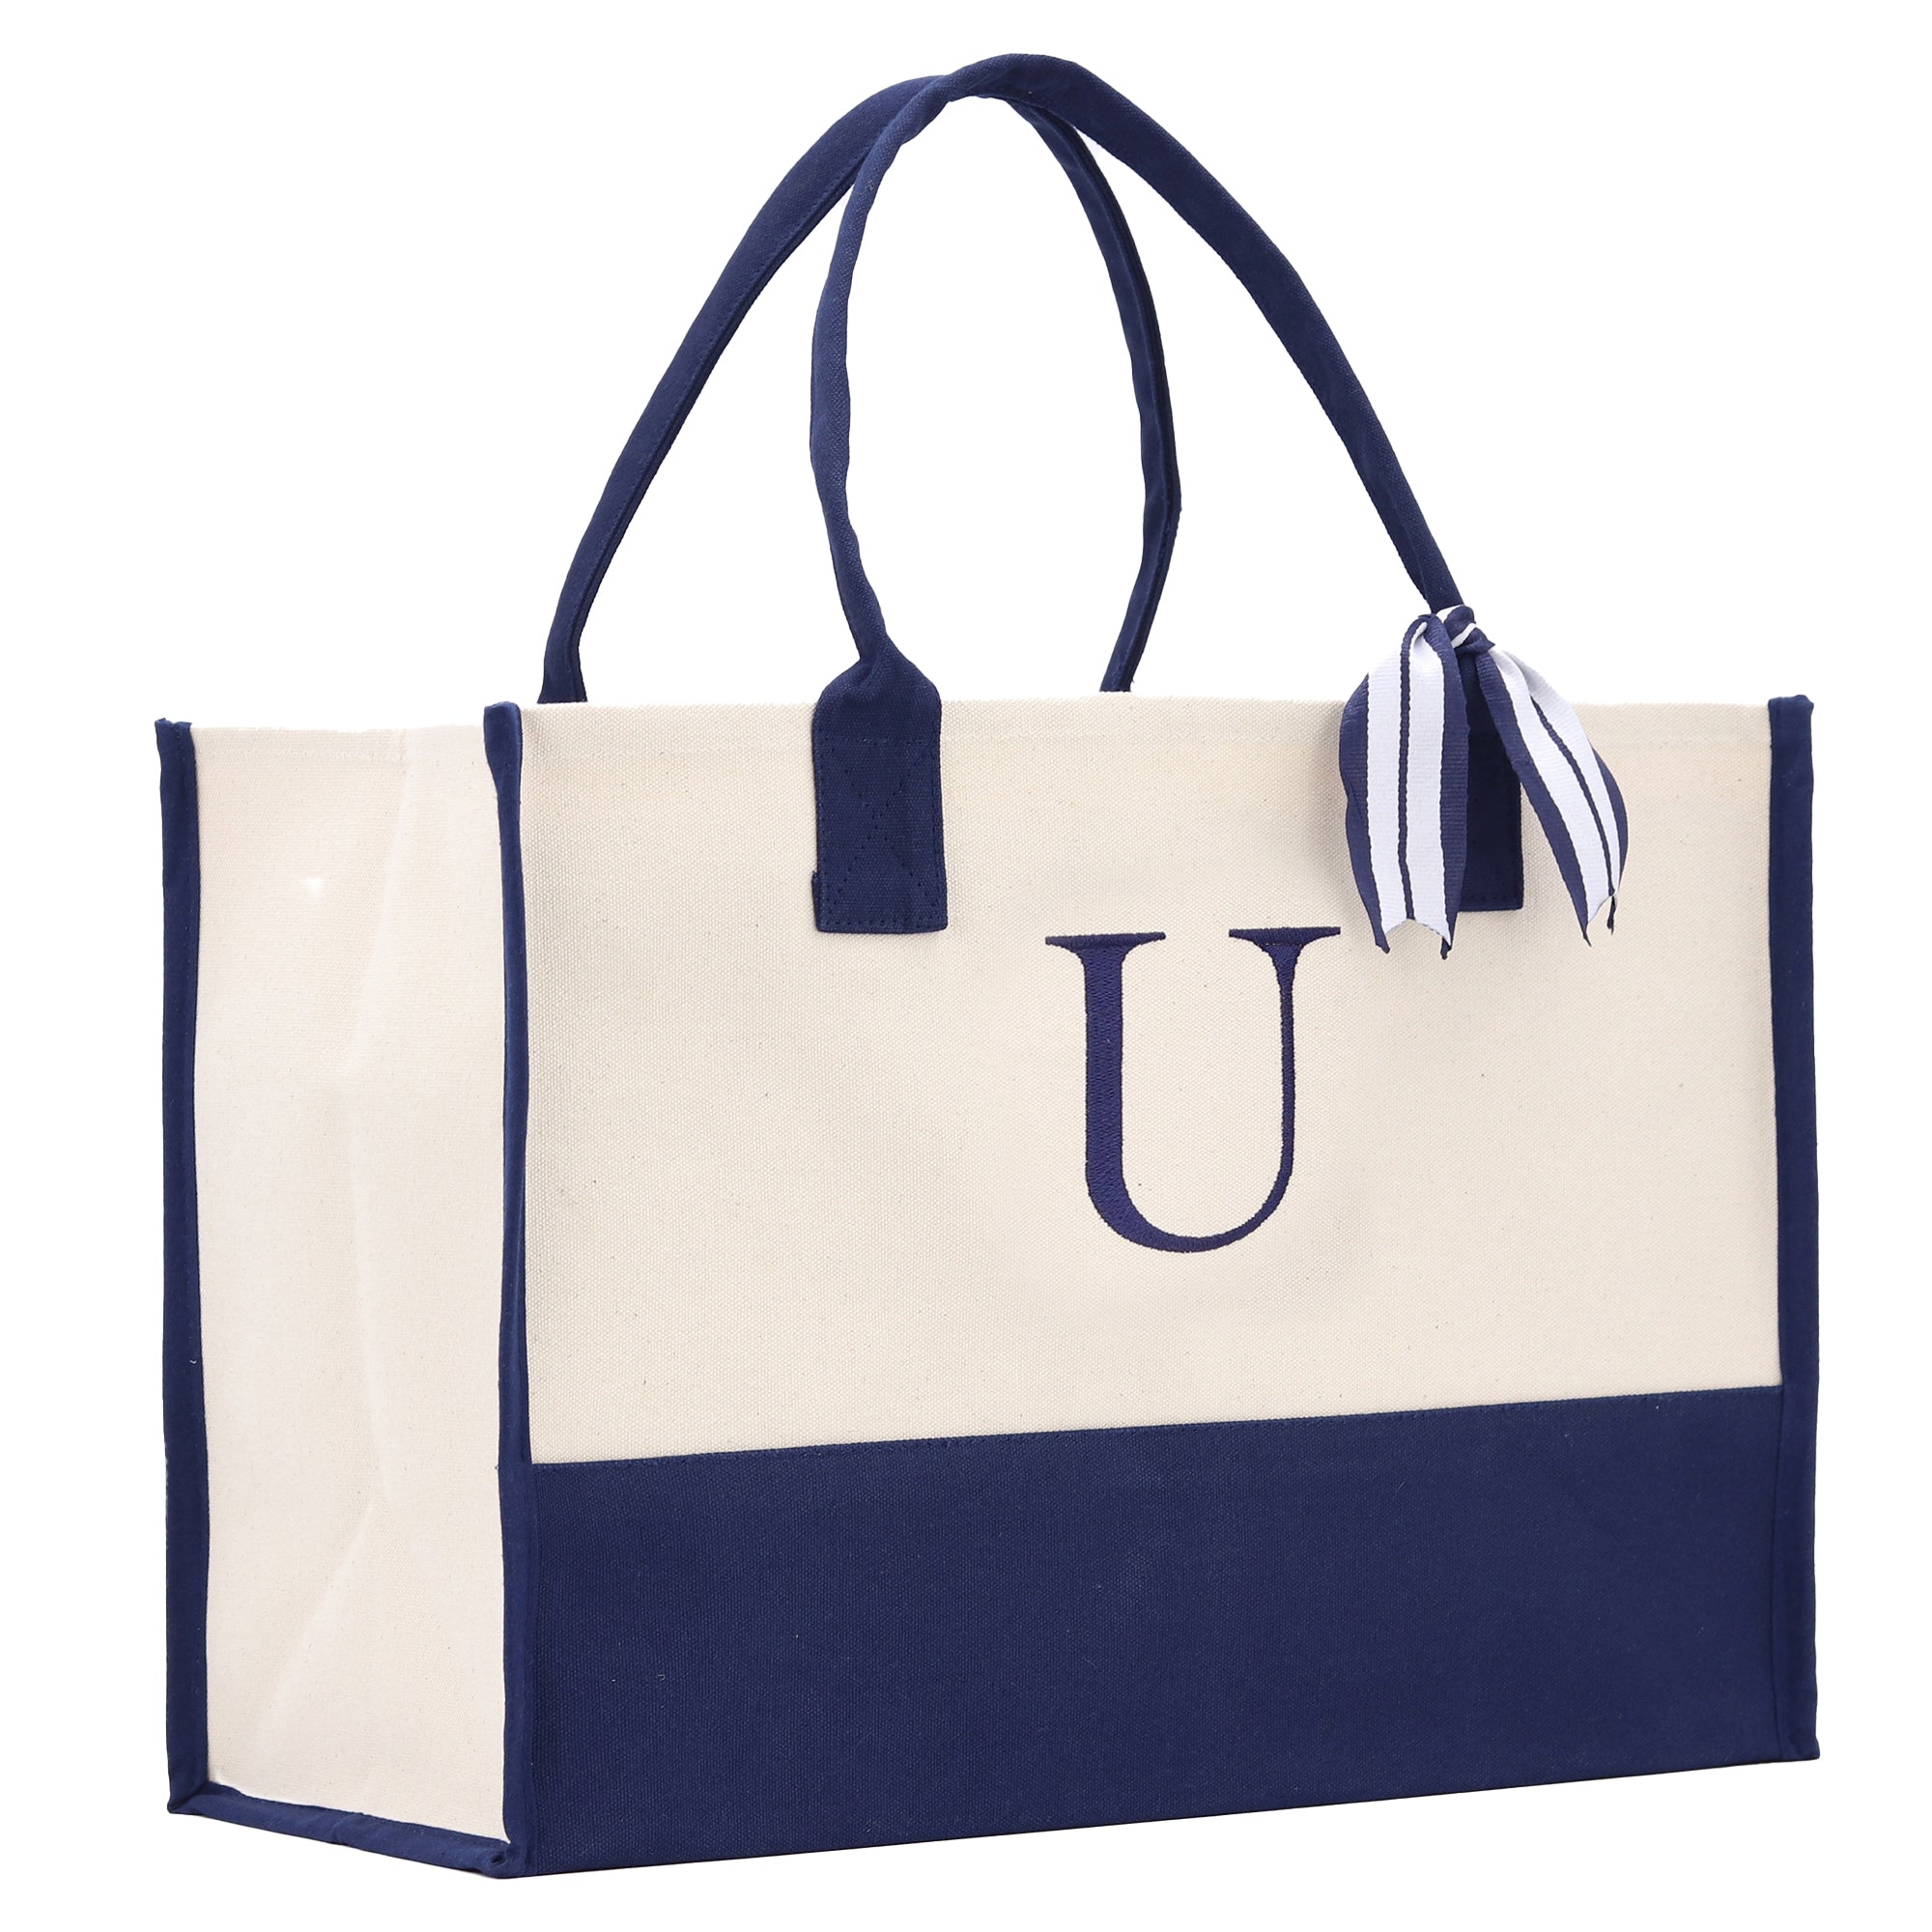 Monogram Tote Bag with 100% Cotton Canvas and a Chic Personalized Monogram Navy Blue Vanessa Rosella Block U 